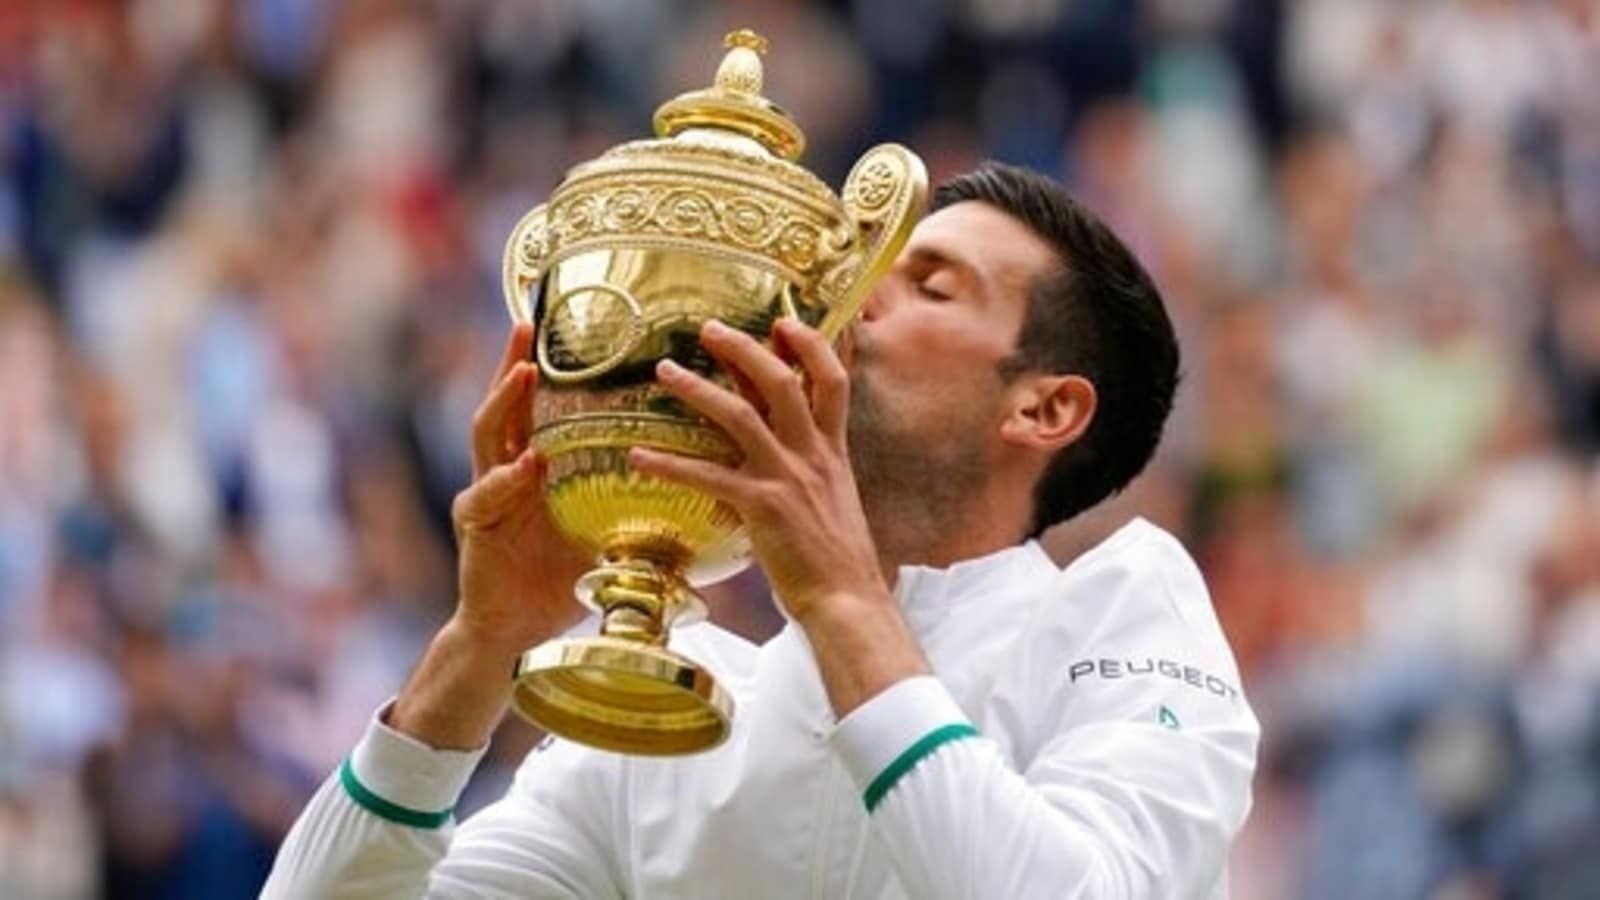 Novak Djokovic Wins Wimbledon 21 All The Numbers And Records About His th Grand Slam Title Tennis News Hindustan Times